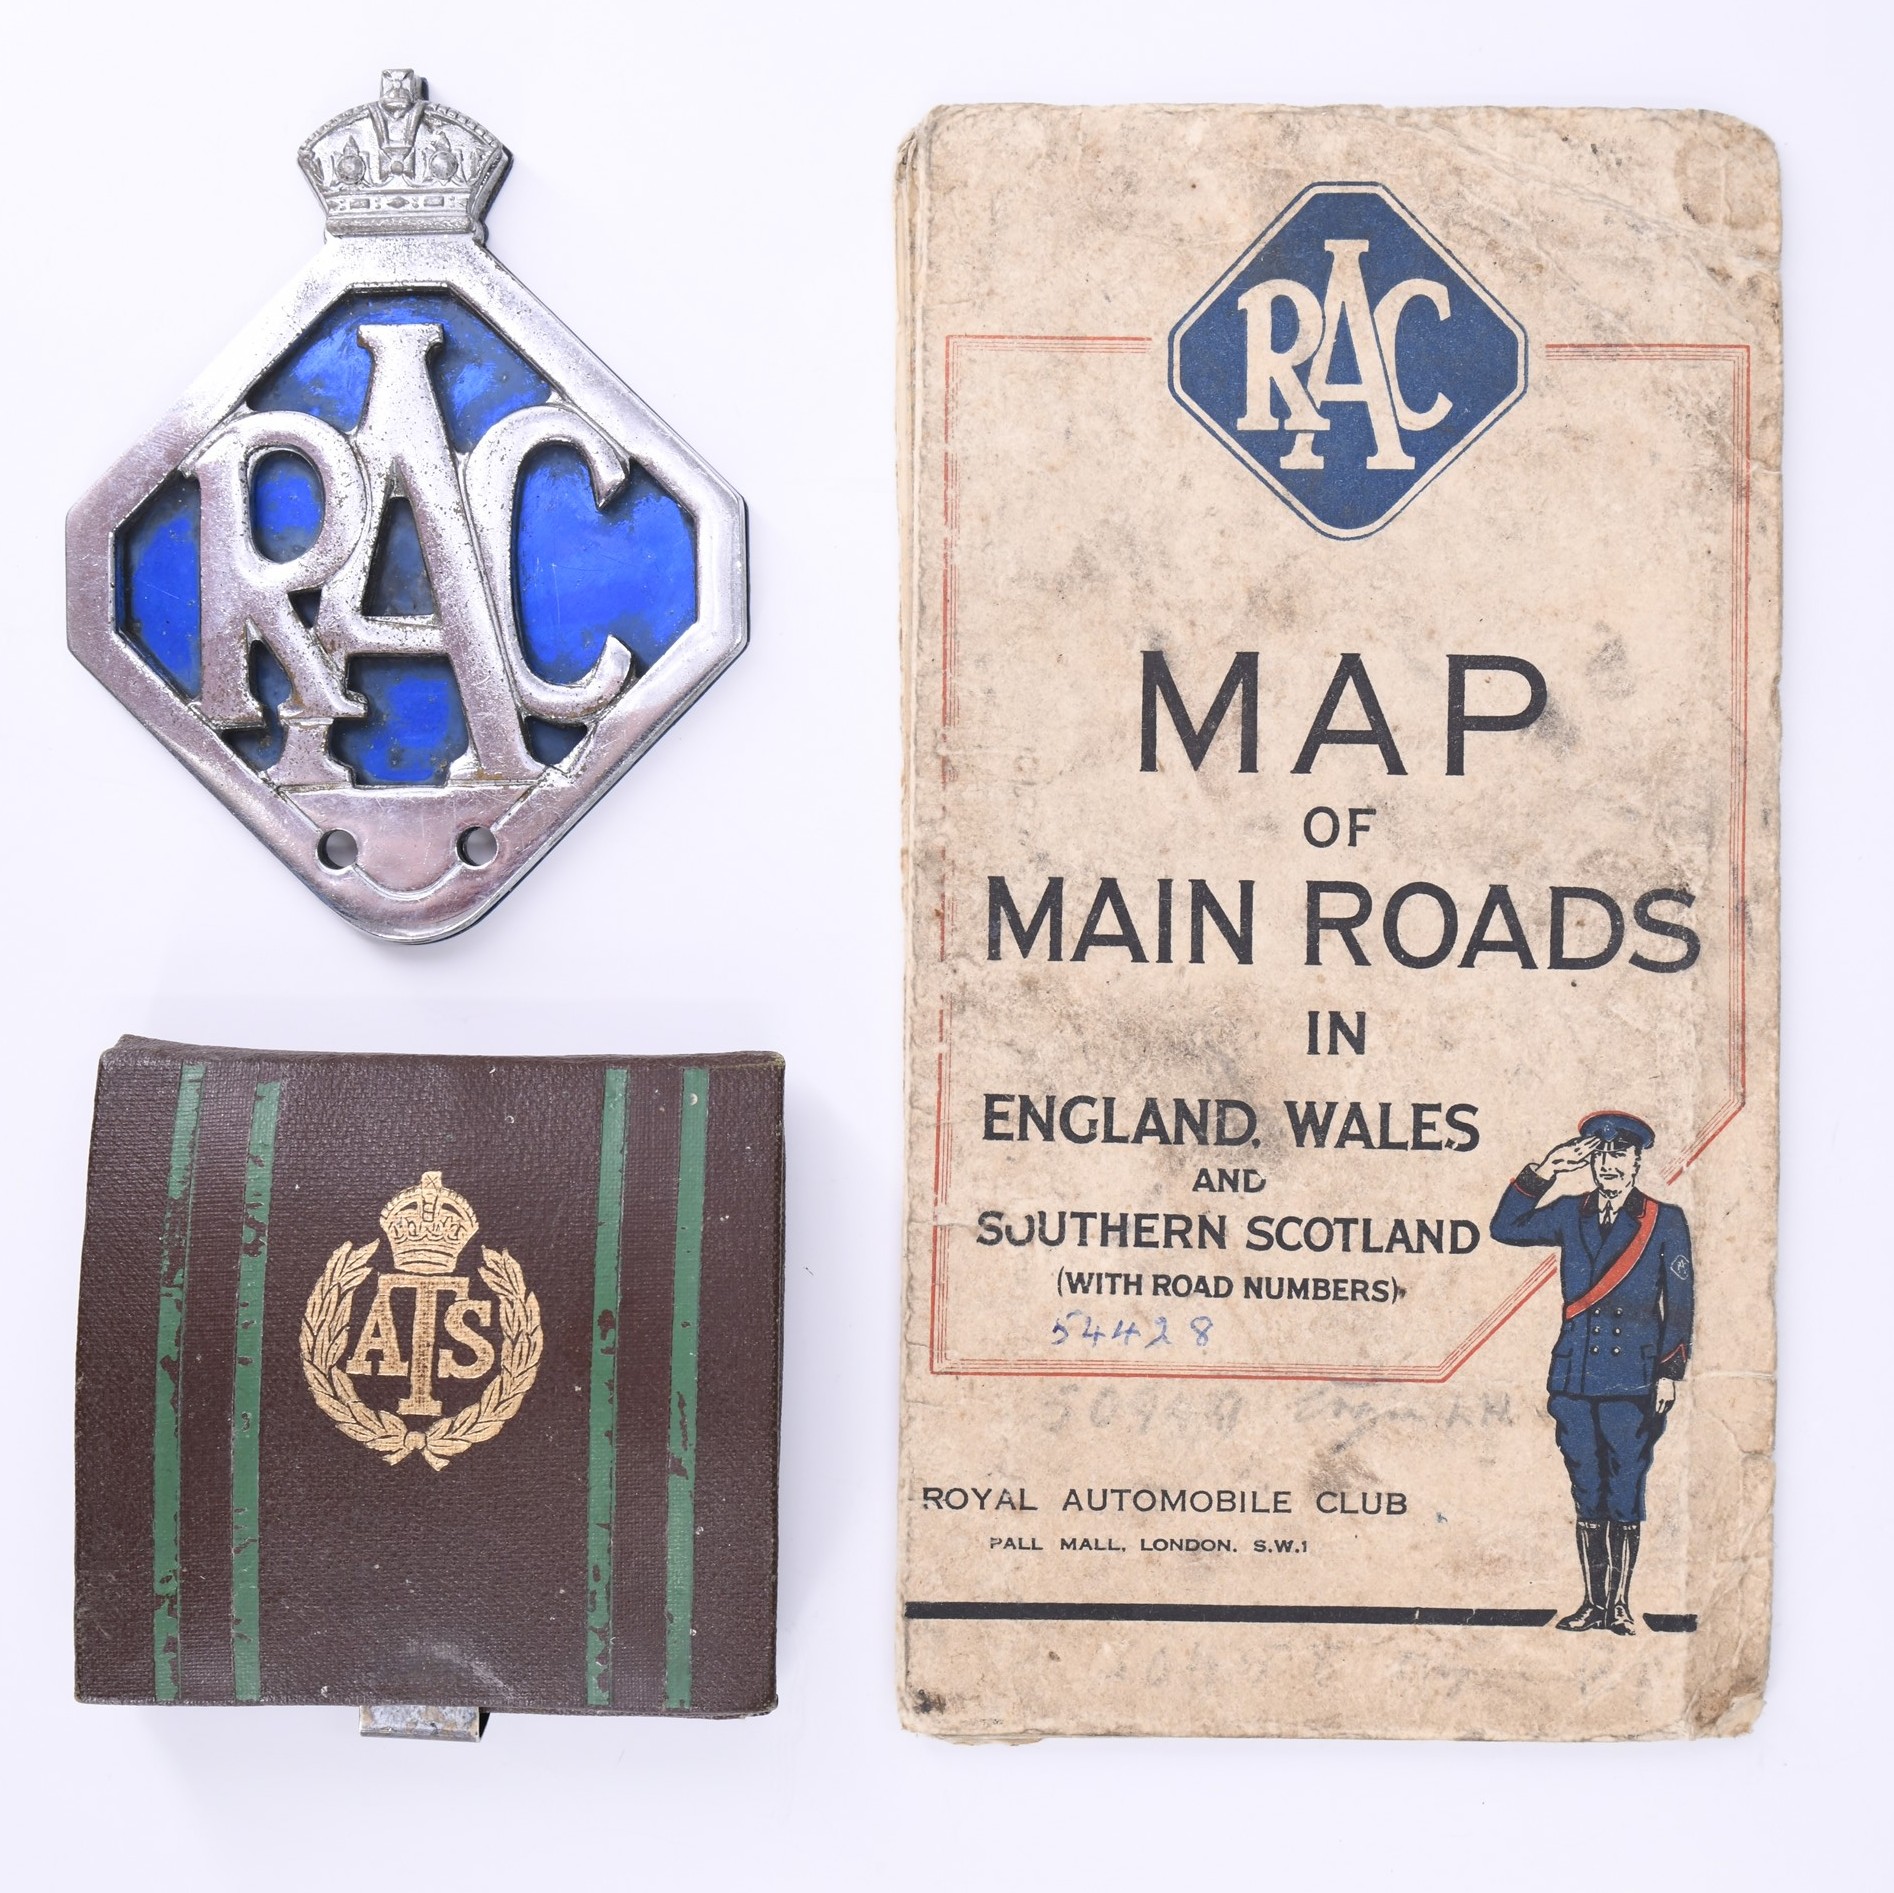 A 1950s RAC chrome and anodised aluminium bumper badge, number 408589, and a glove-box map, together